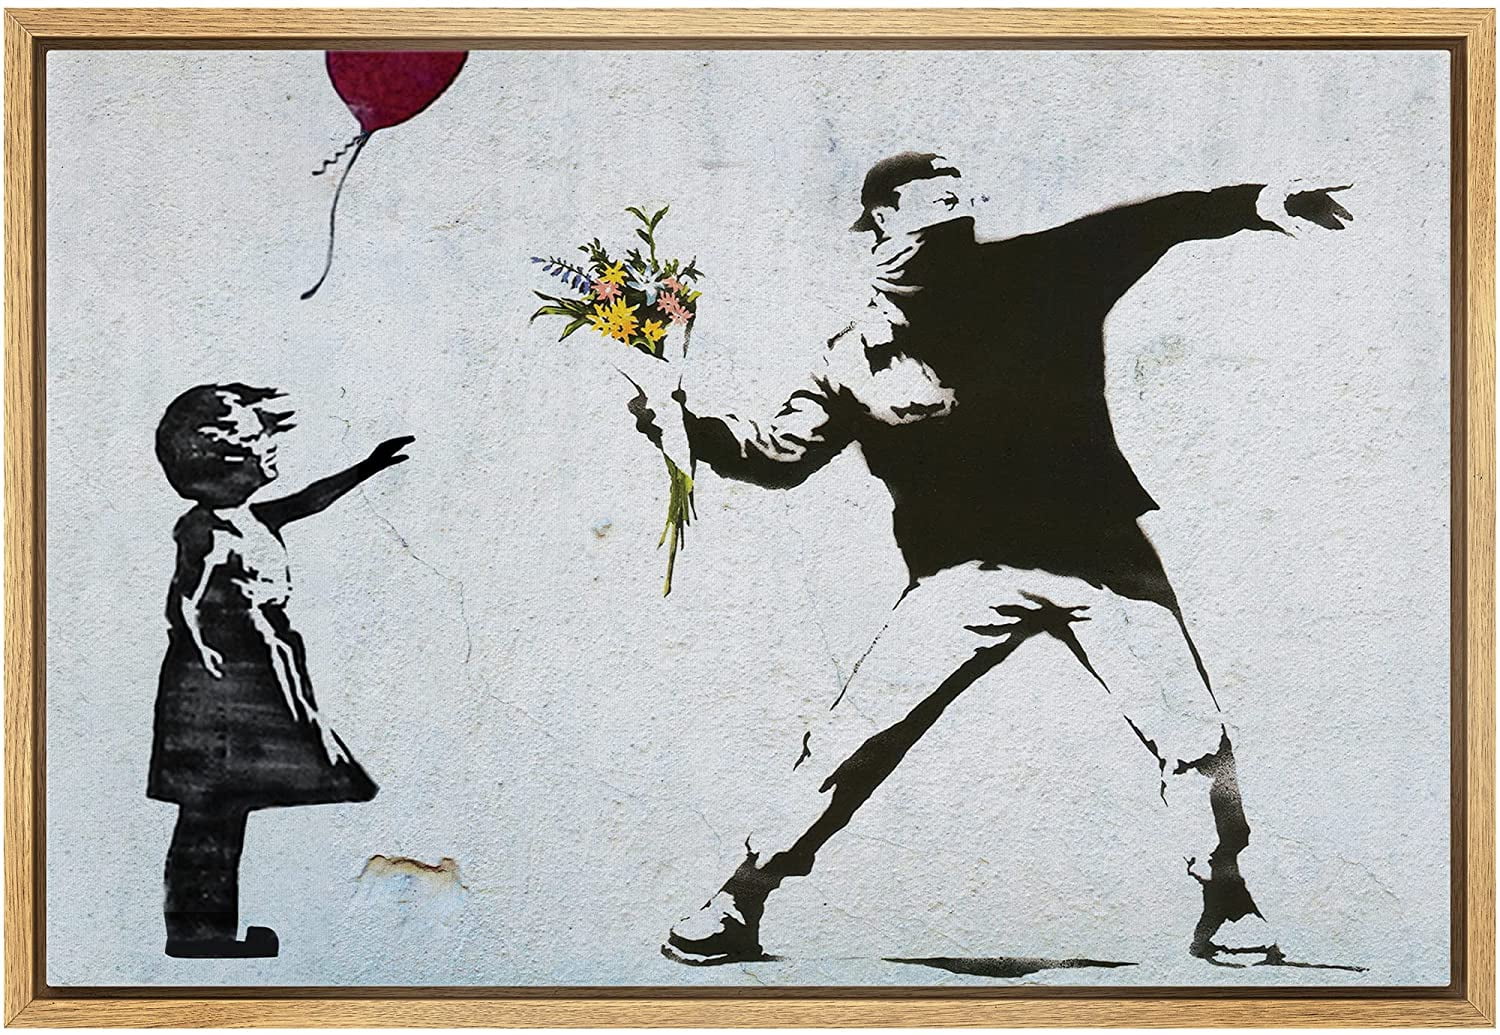 Banksy - Excellent Throw print by Editors Choice